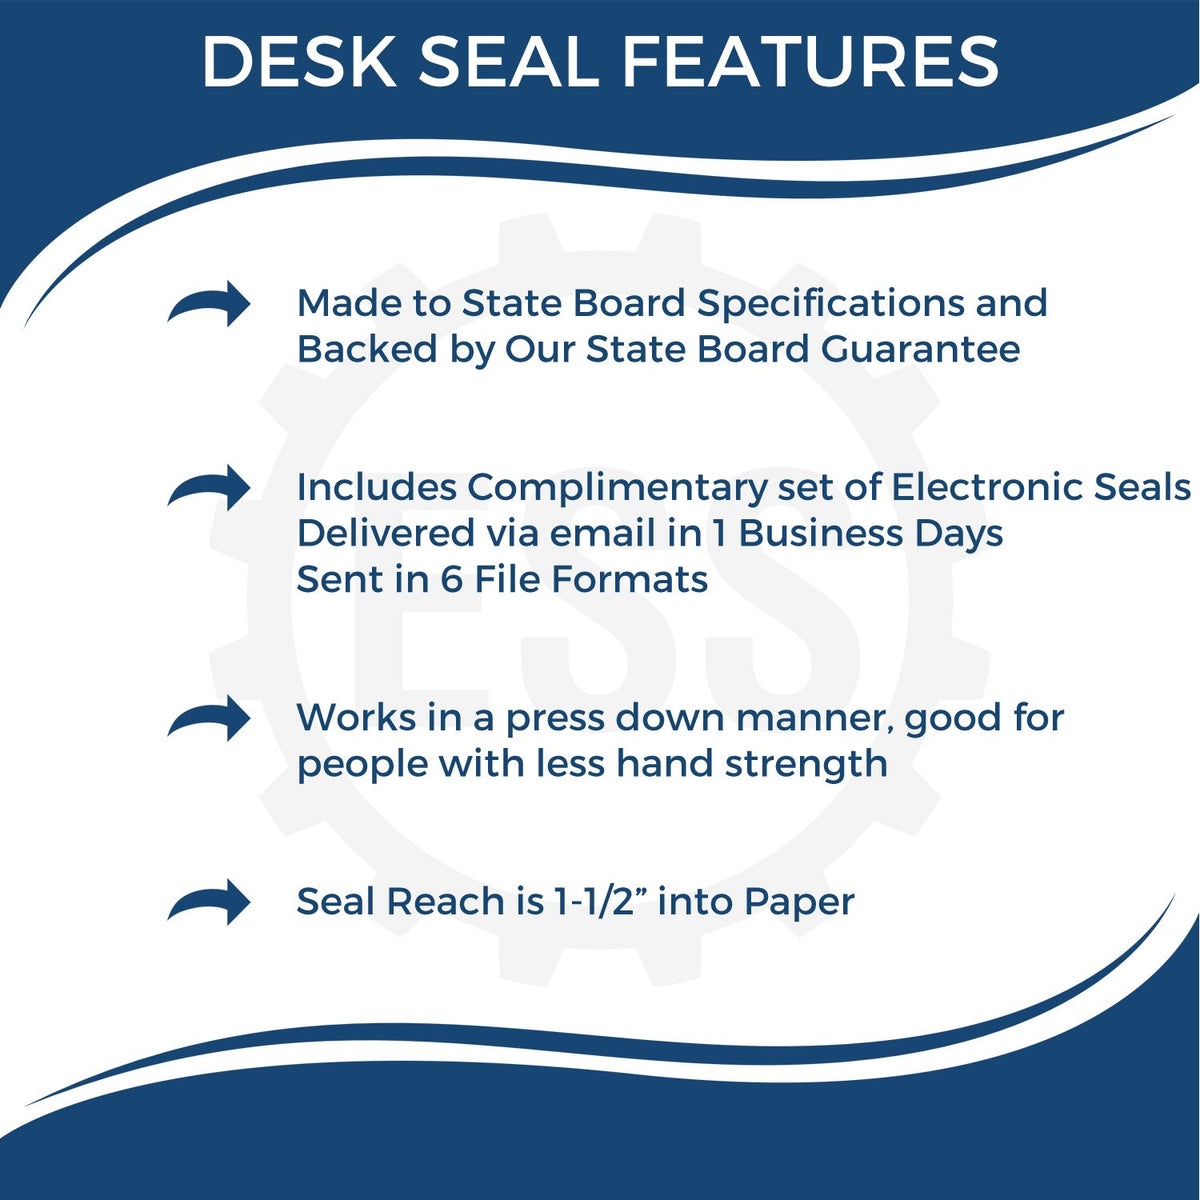 A picture of an infographic highlighting the selling points for the New Mexico Geologist Desk Seal